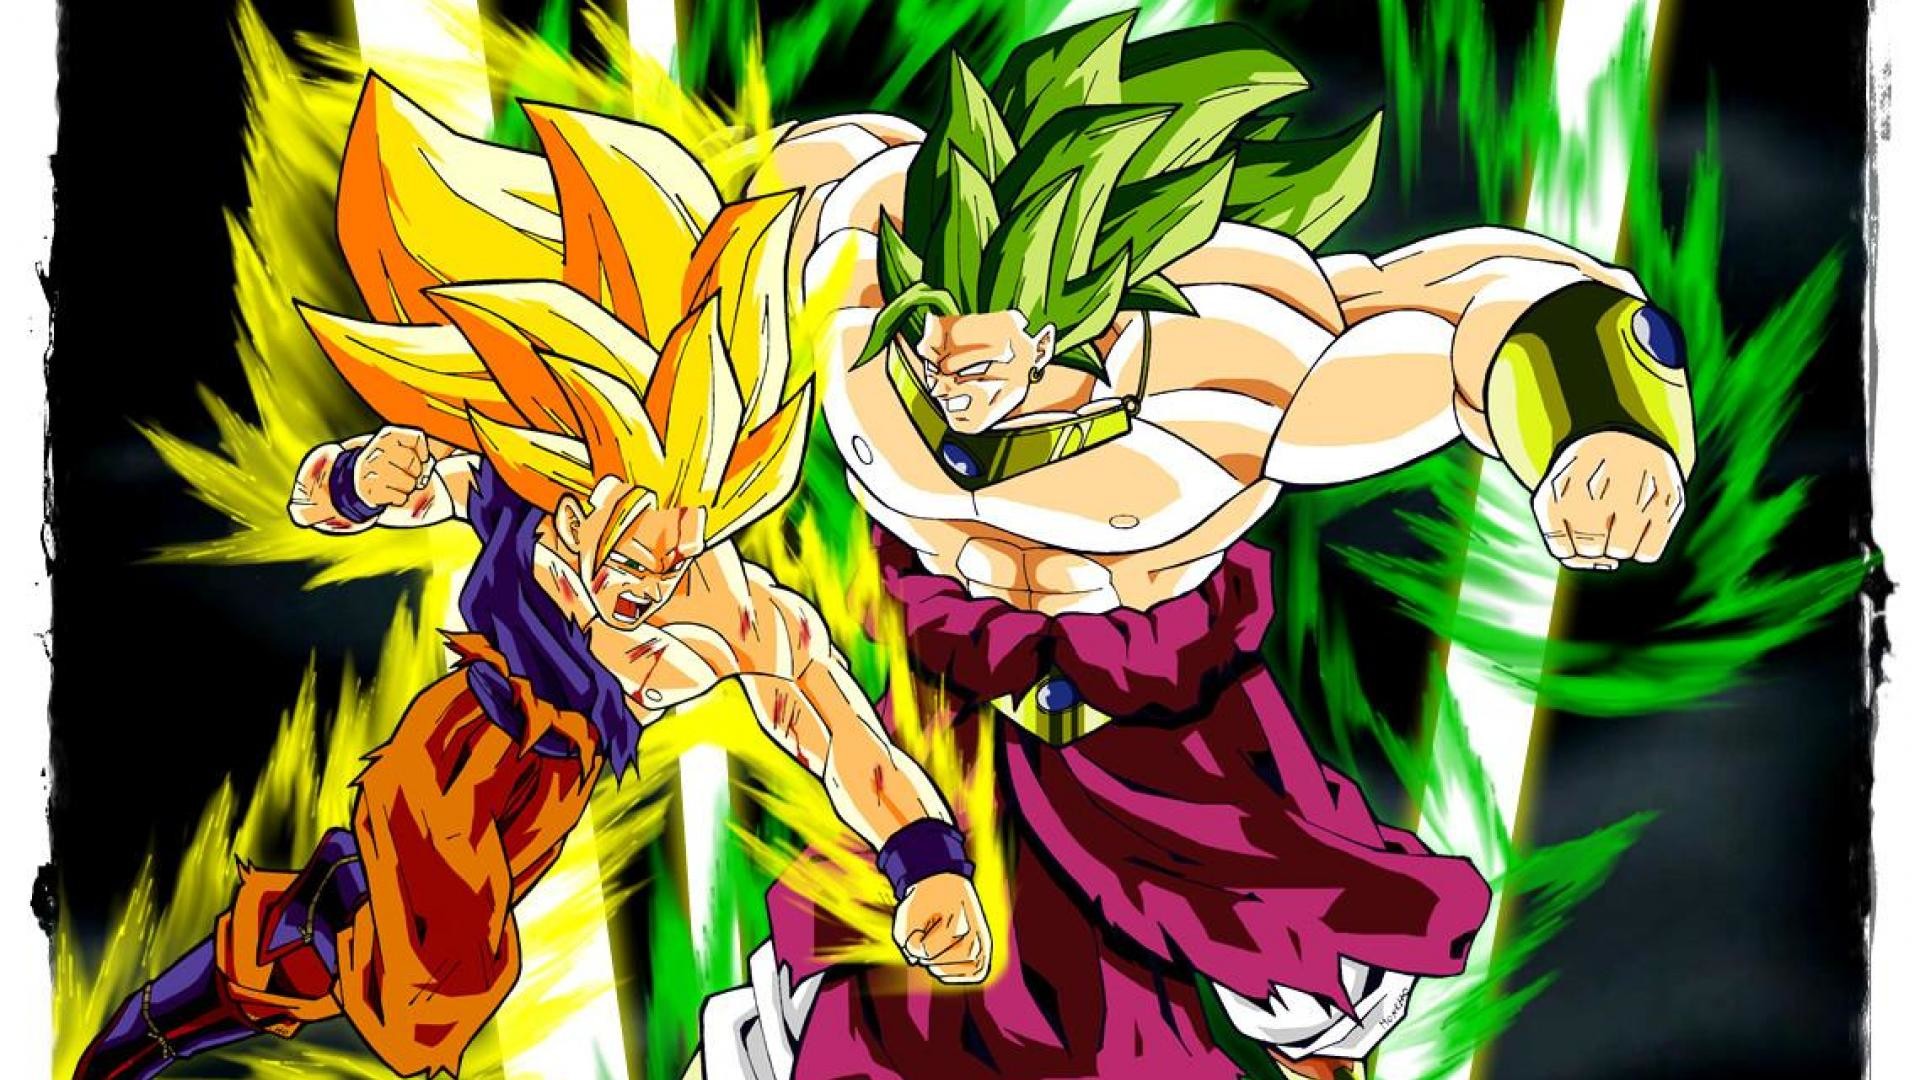 https://www.nobedad.com/article/hd-online-watch-dragon-ball-super-broly-2019-full-movie-123movies/c=